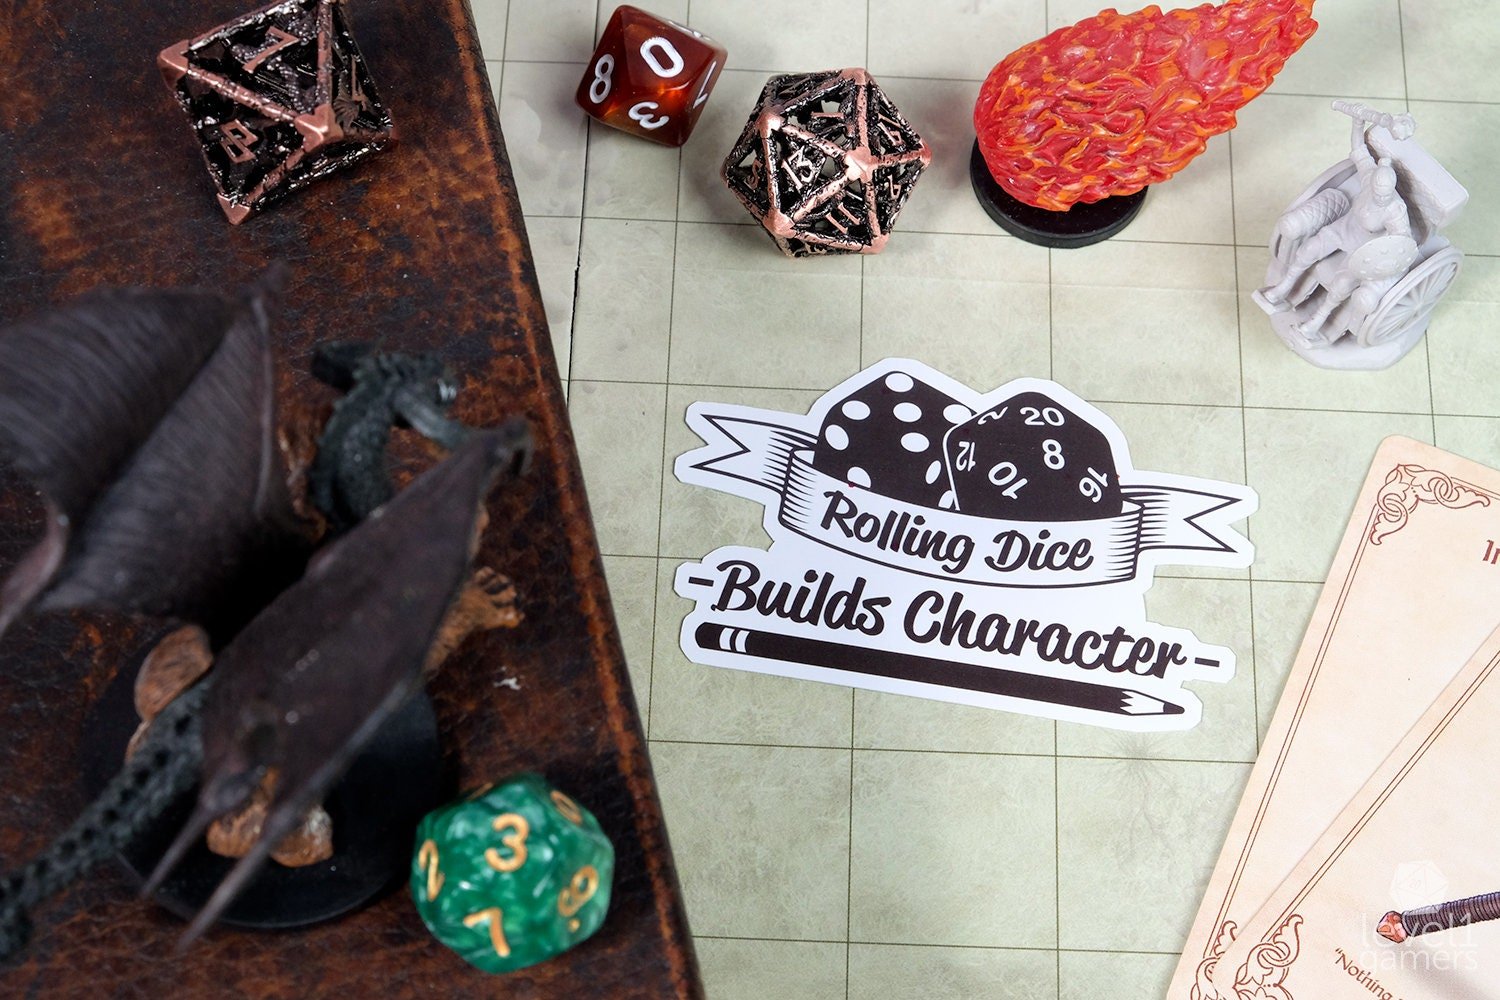 Rolling Dice Builds Character Sticker  Level 1 Gamers   